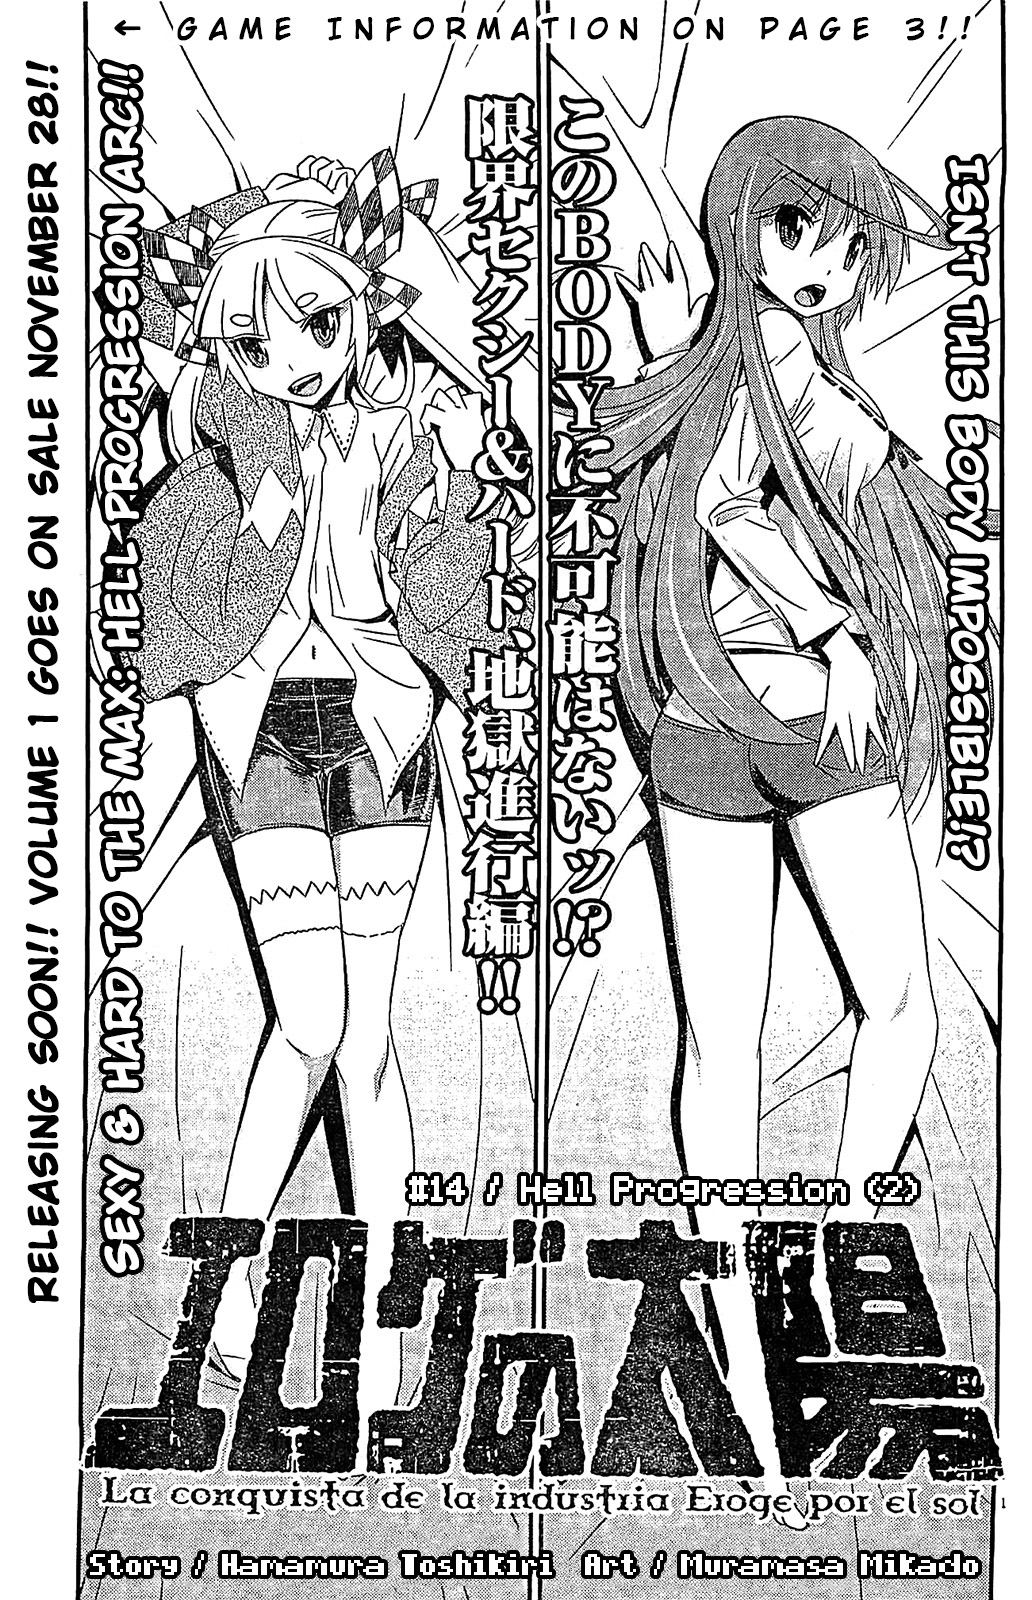 Eroge no Taiyou - Chapter 9961 - Hell Progression (2) - Image 1